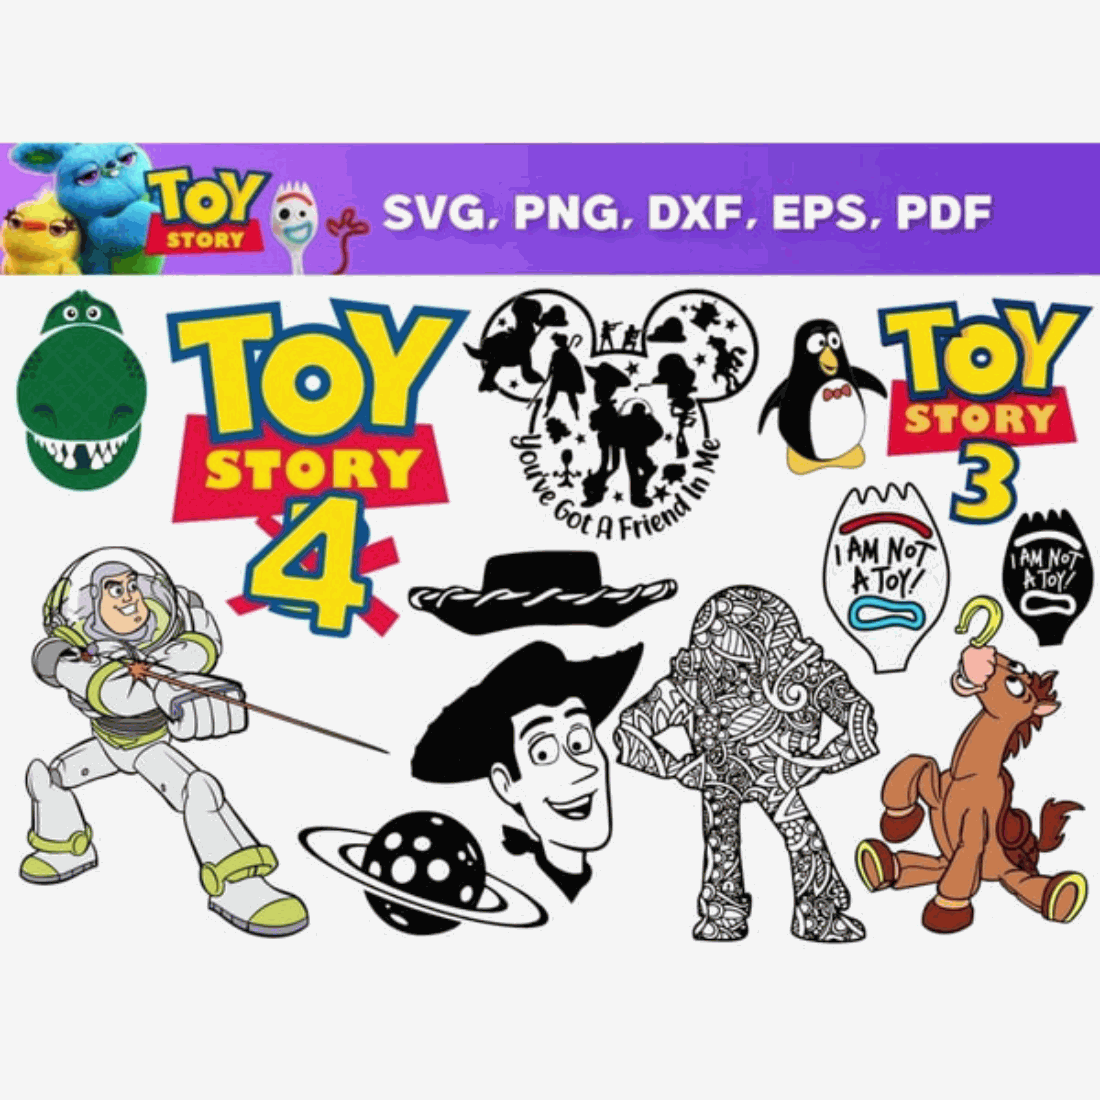 Toy Story SVG, Toy Story Font, Toy Story PNG, Toy Story Characters SVG, Woody SVG, Forky SVG, Toy Story Alien SVG preview image.